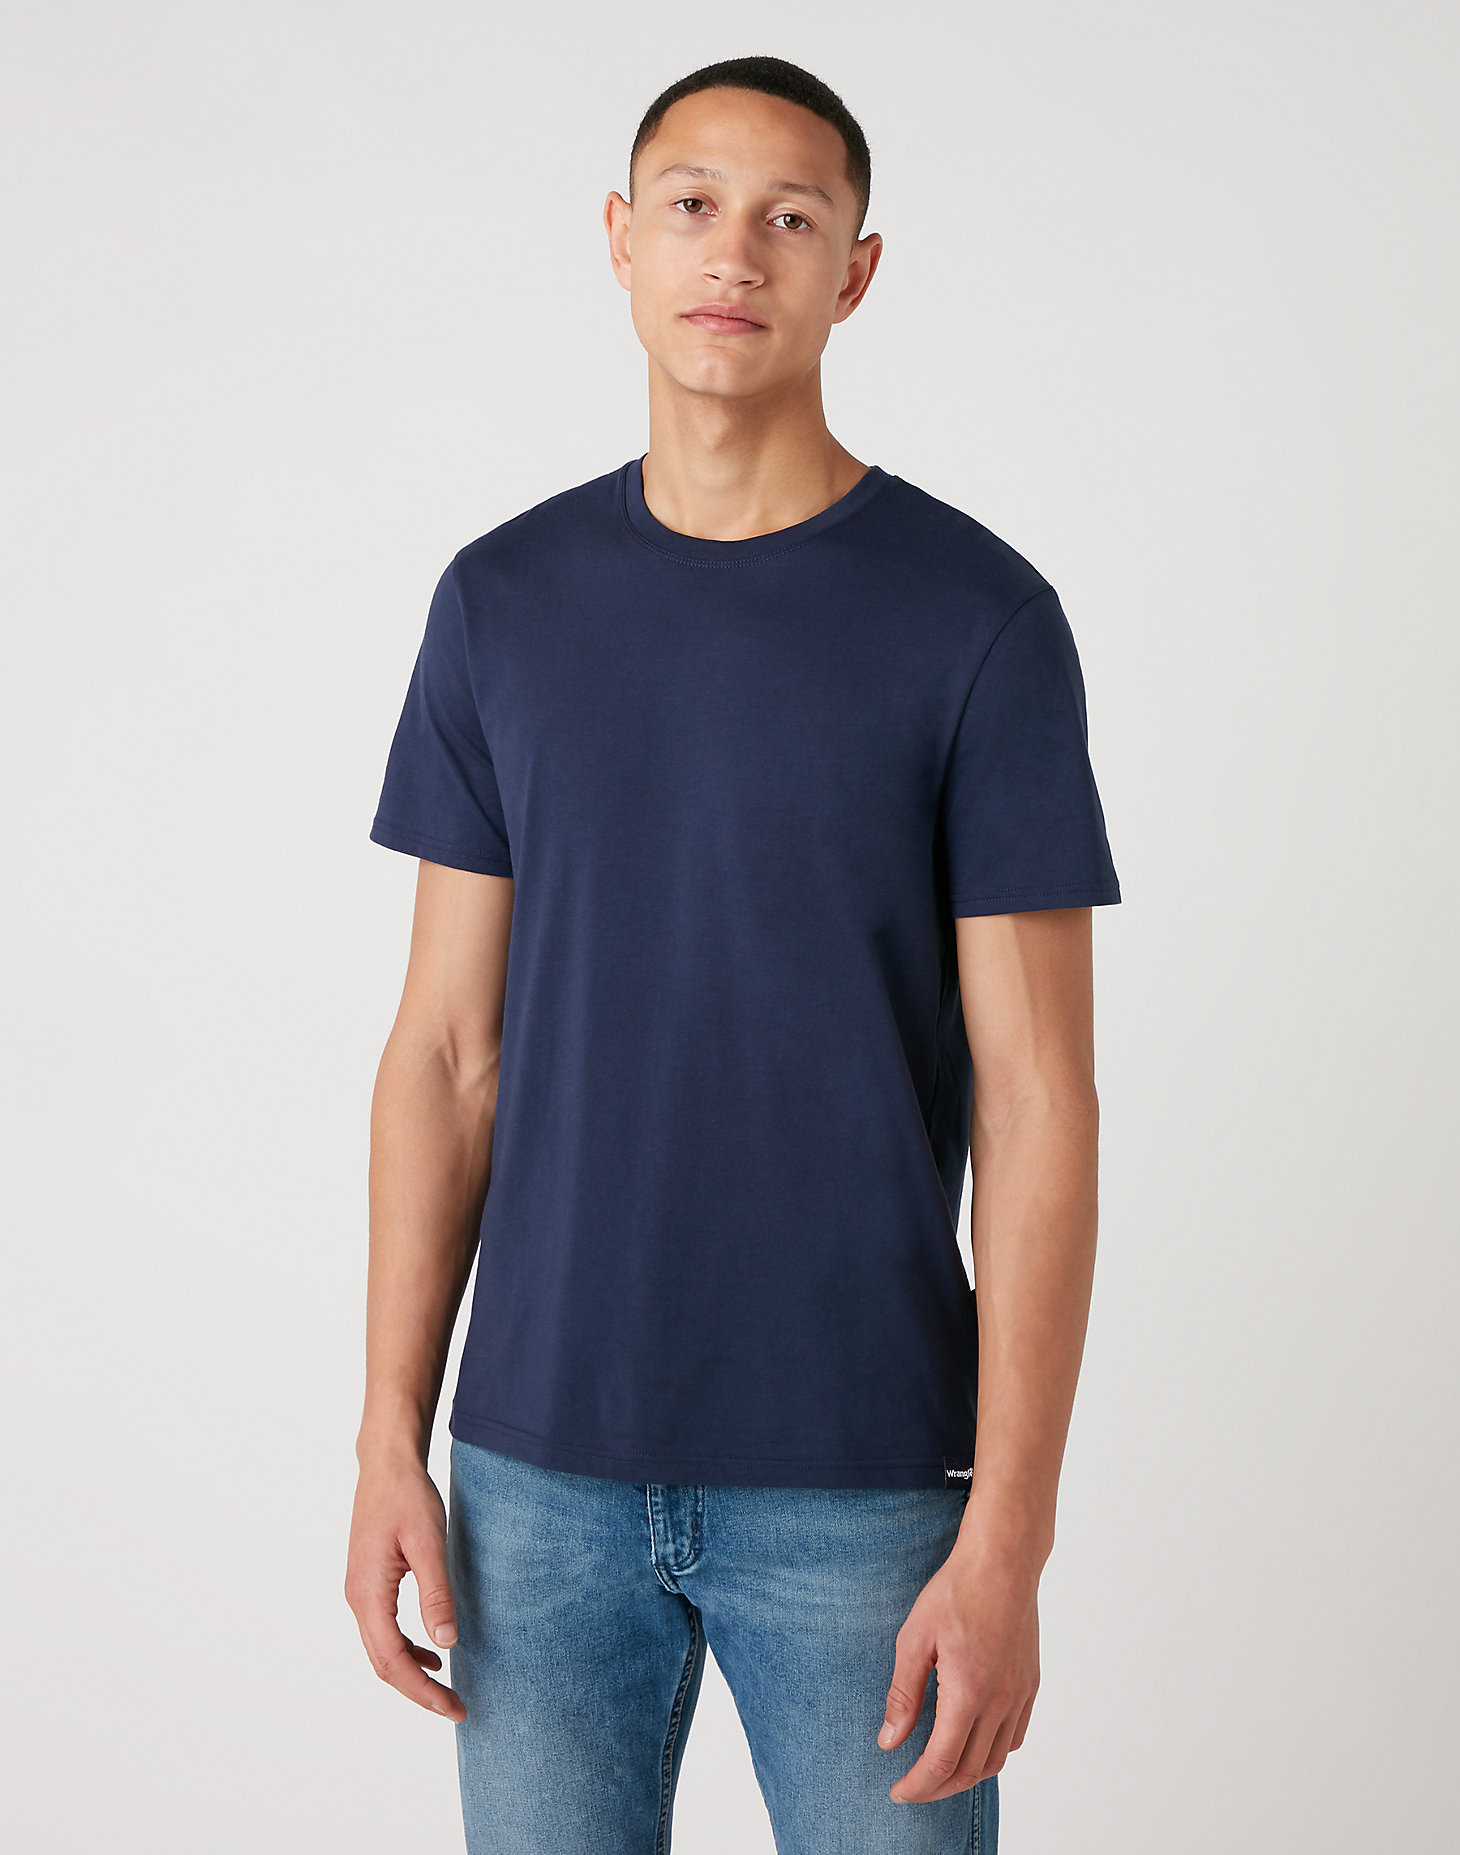 Short Sleeve Two Pack Tee in Navy and White main view